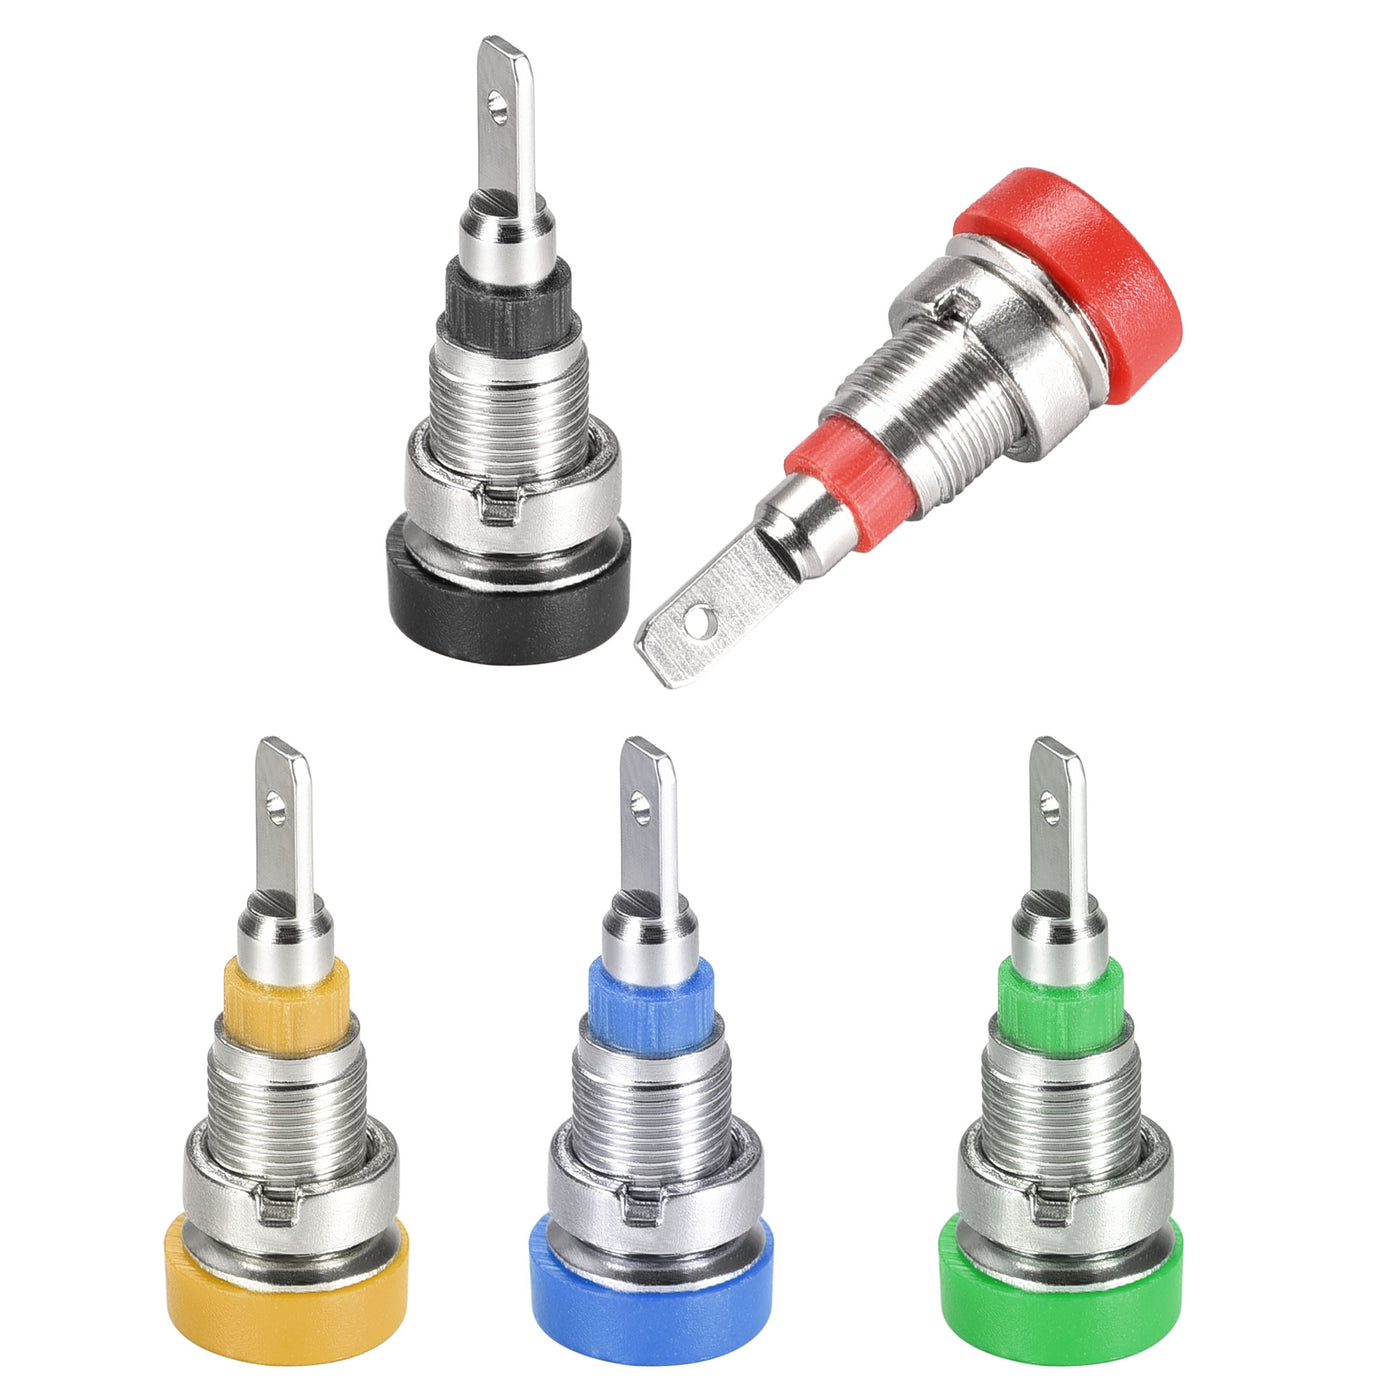 uxcell Uxcell 10pcs 2mm Banana Jack Binding Post Female Socket Plug Terminal Connector for Loudspeaker Amplifier Red Black Yellow Blue Green